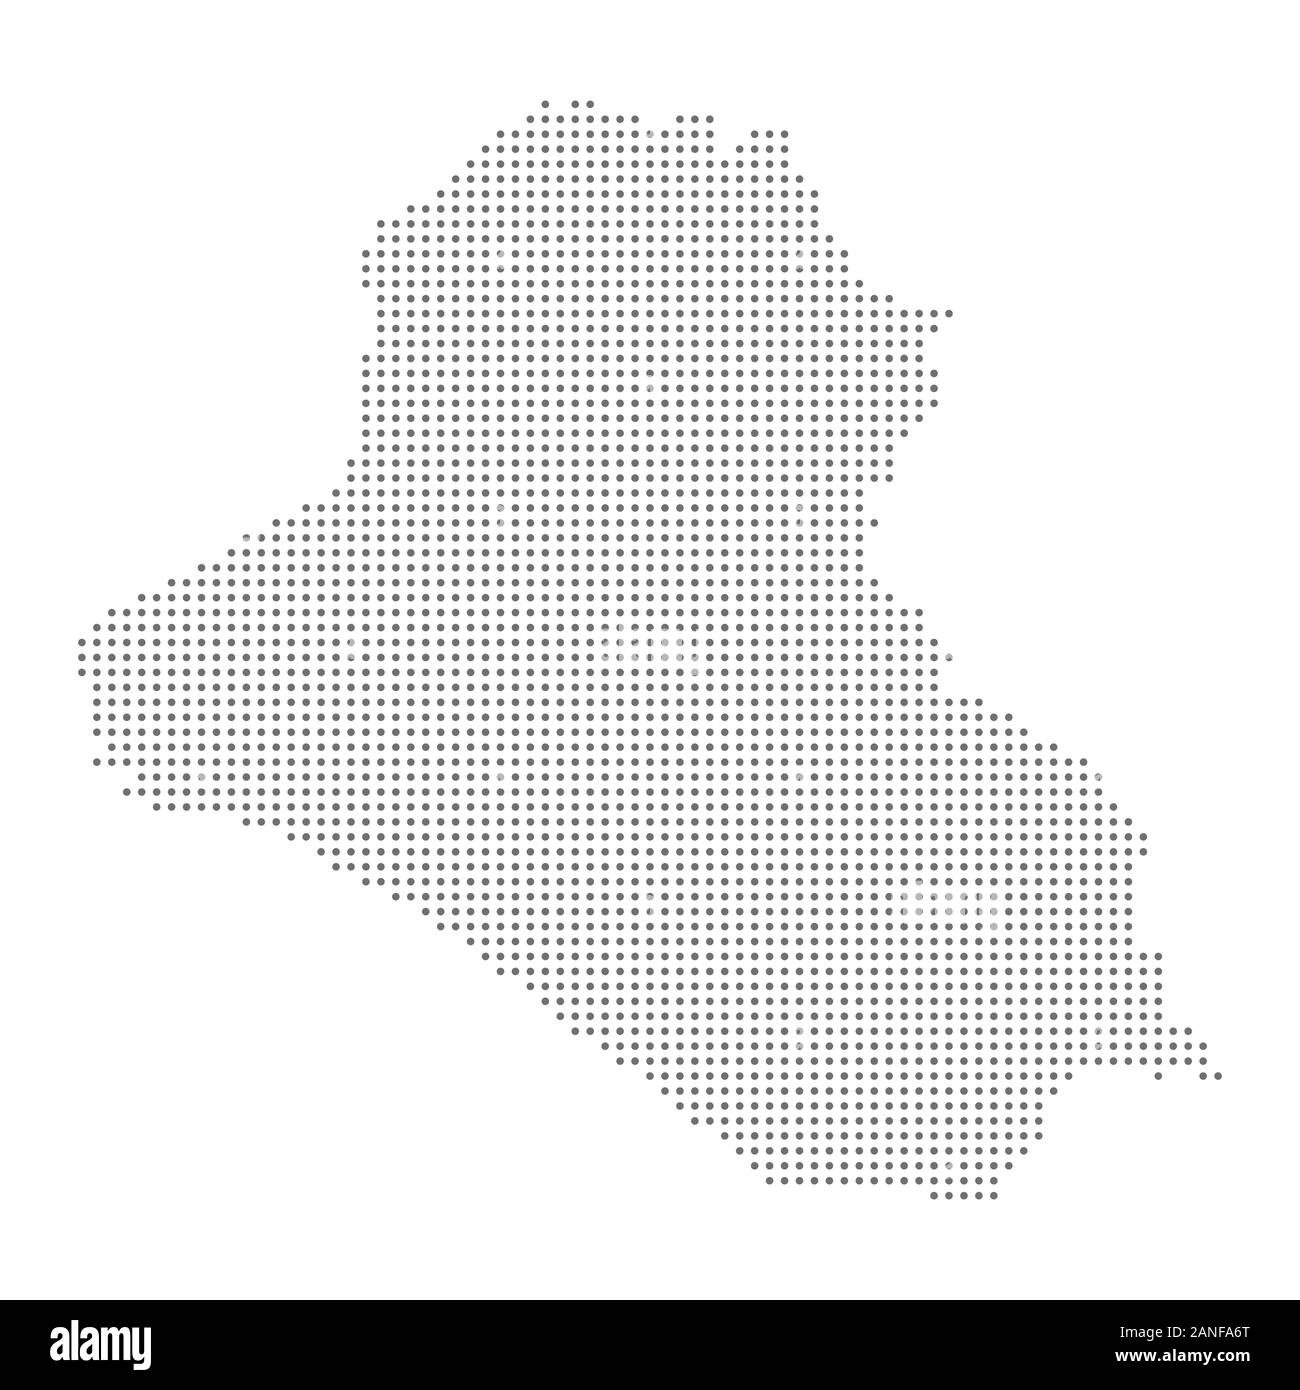 Map of Iraq vector illustration with dots. Web design, wallpaper, flyers, footage, posters, brochure banners Stock Vector